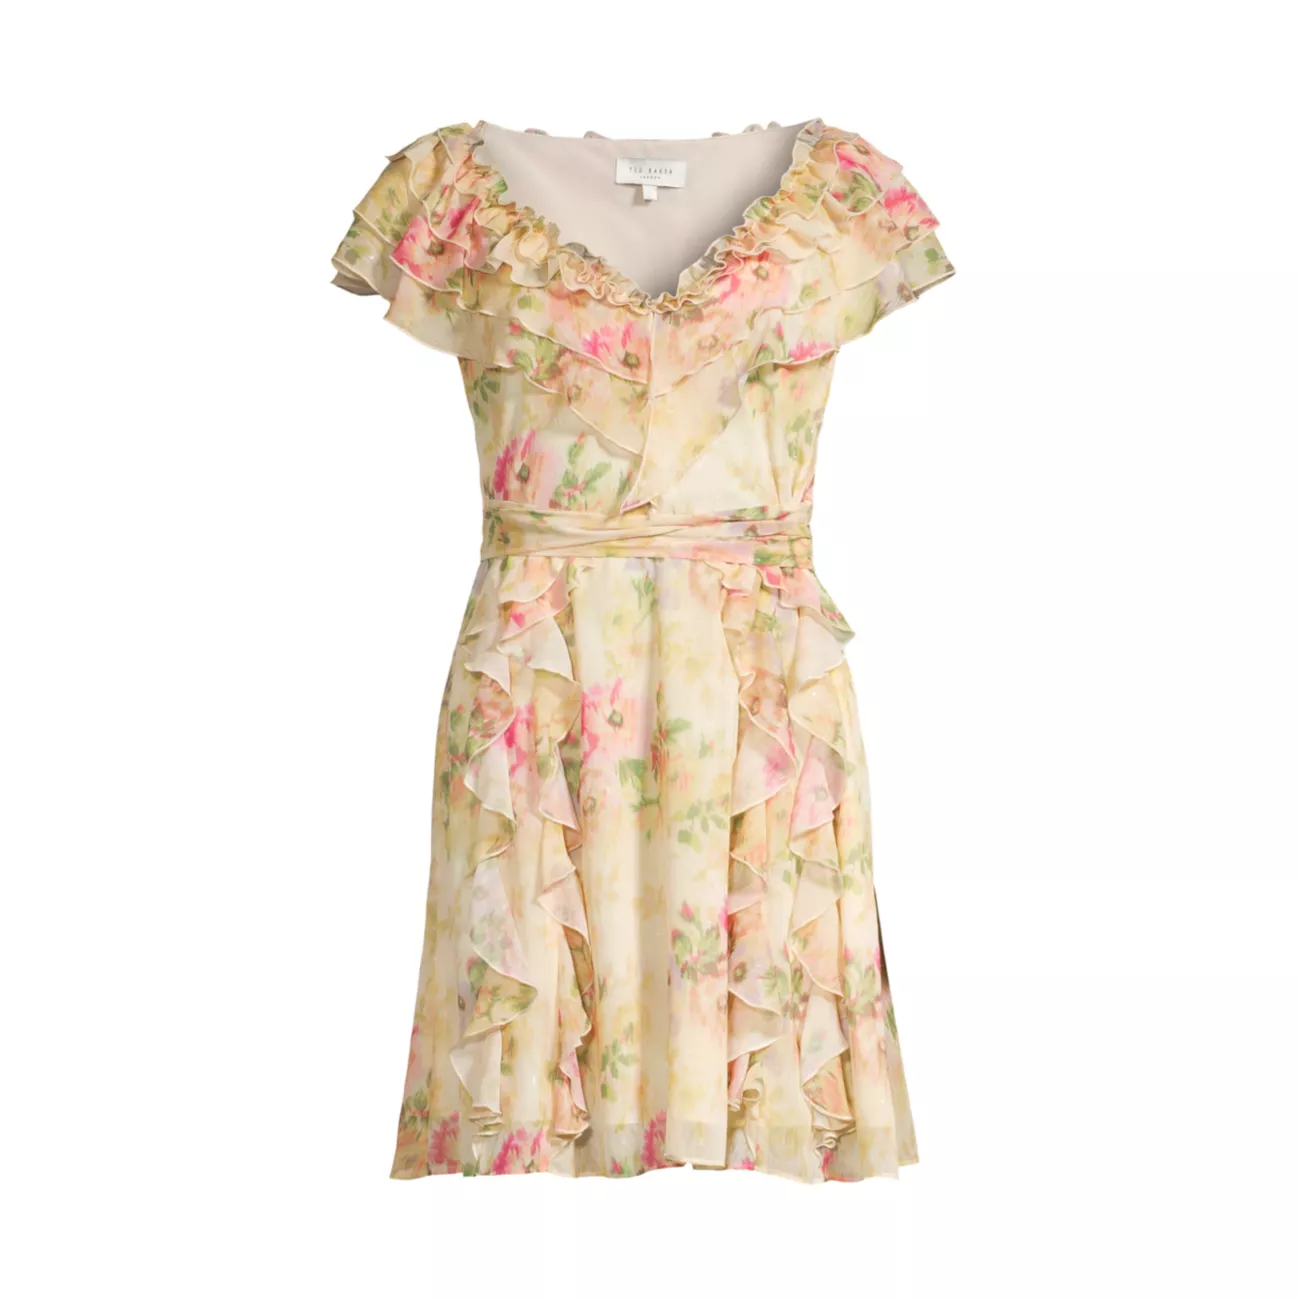 Ammiah Floral Ruffled Minidress Ted Baker